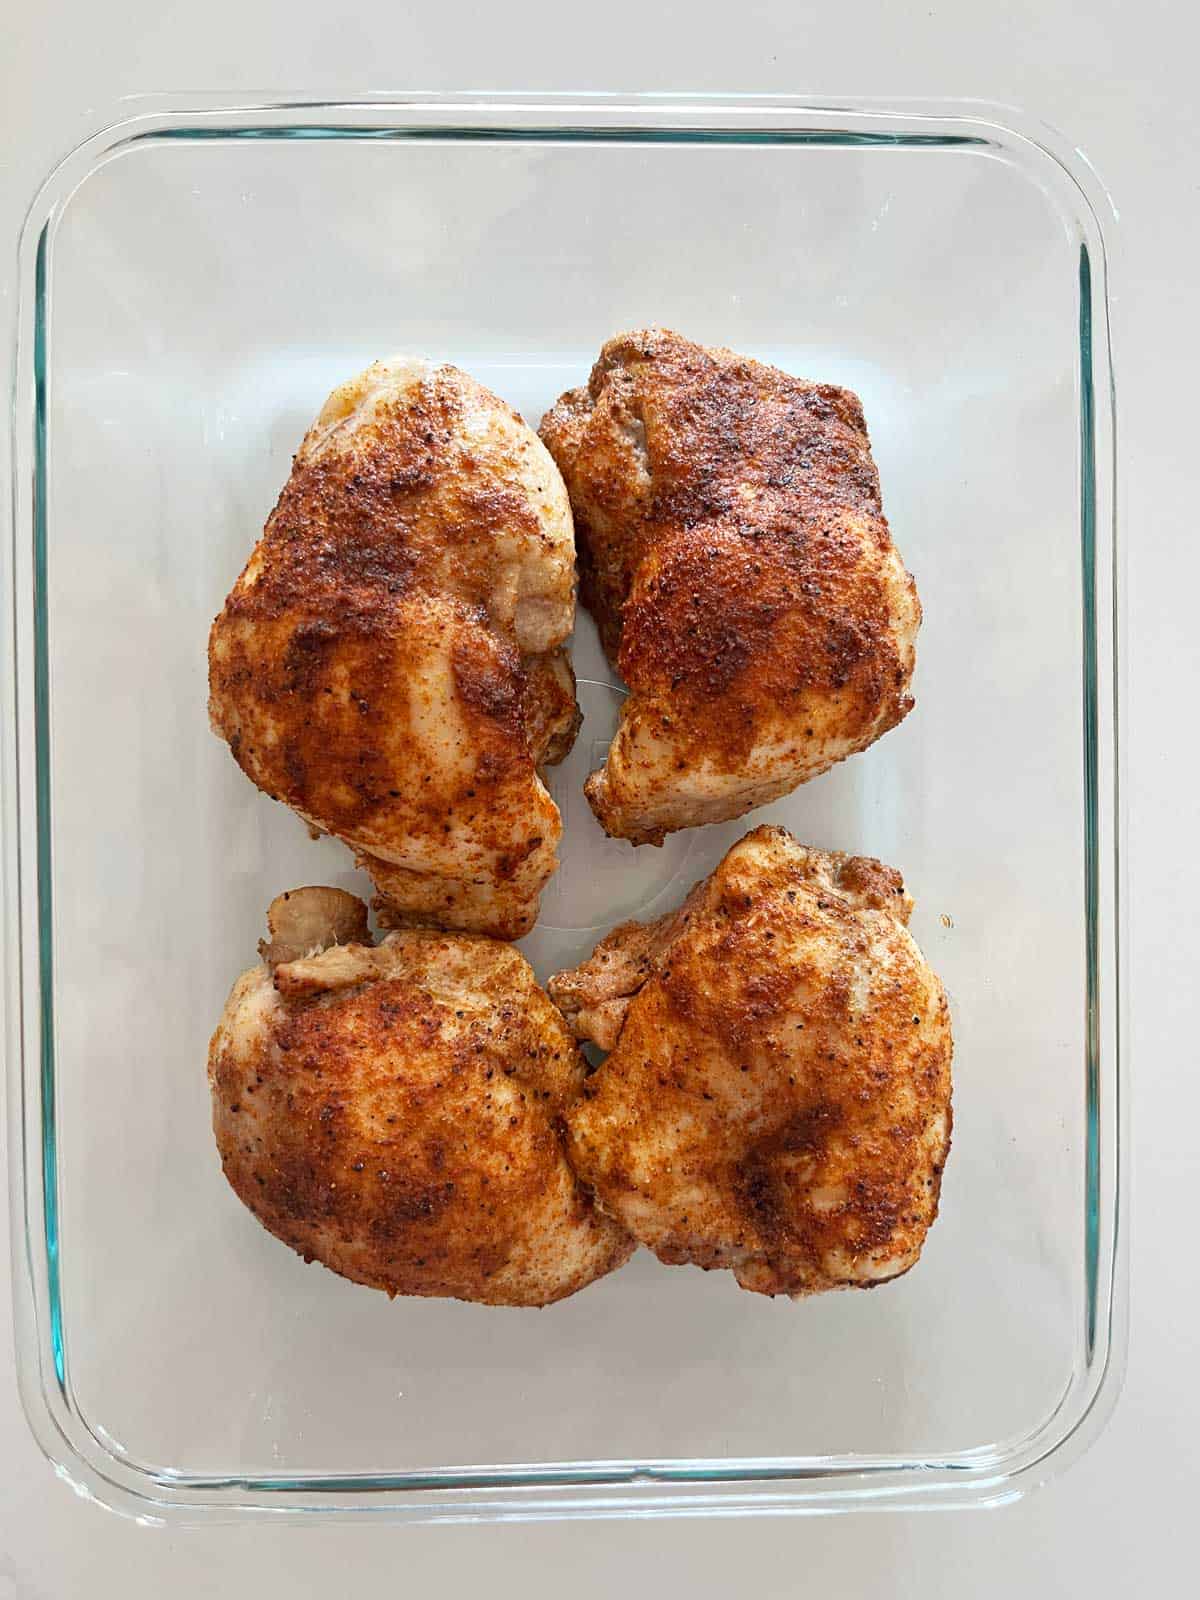 Boneless chicken thighs leftovers are stored in a glass food storage container.